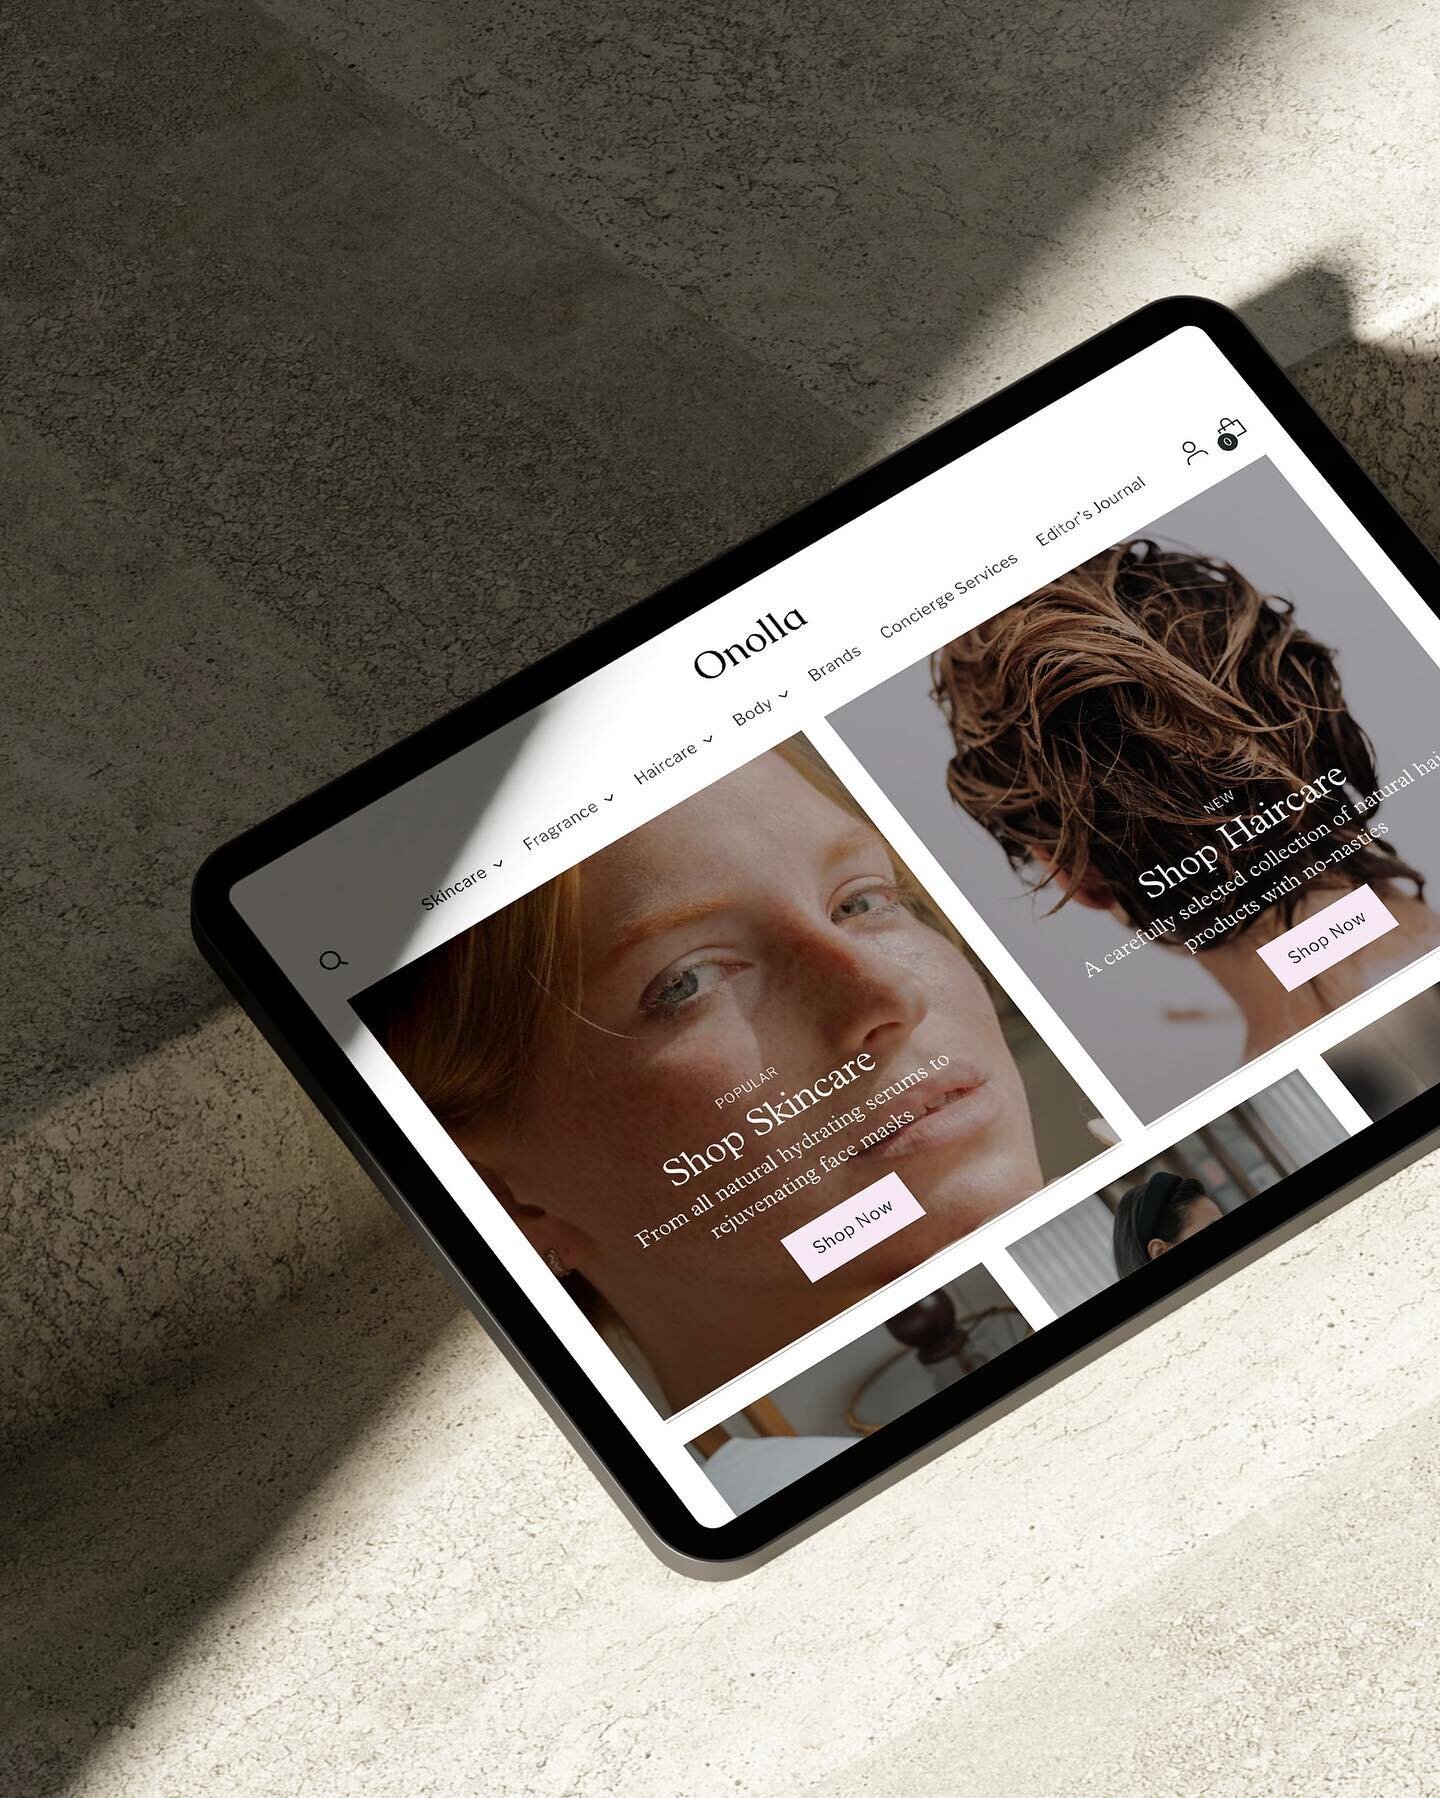 We had the pleasure of being chosen to create a brand new website for the ultimate independent wellness destination @onollaofficial. Created by prestigious journalist and wellness expert Suzanne Duckett - she tasked us to create a new strong brand id